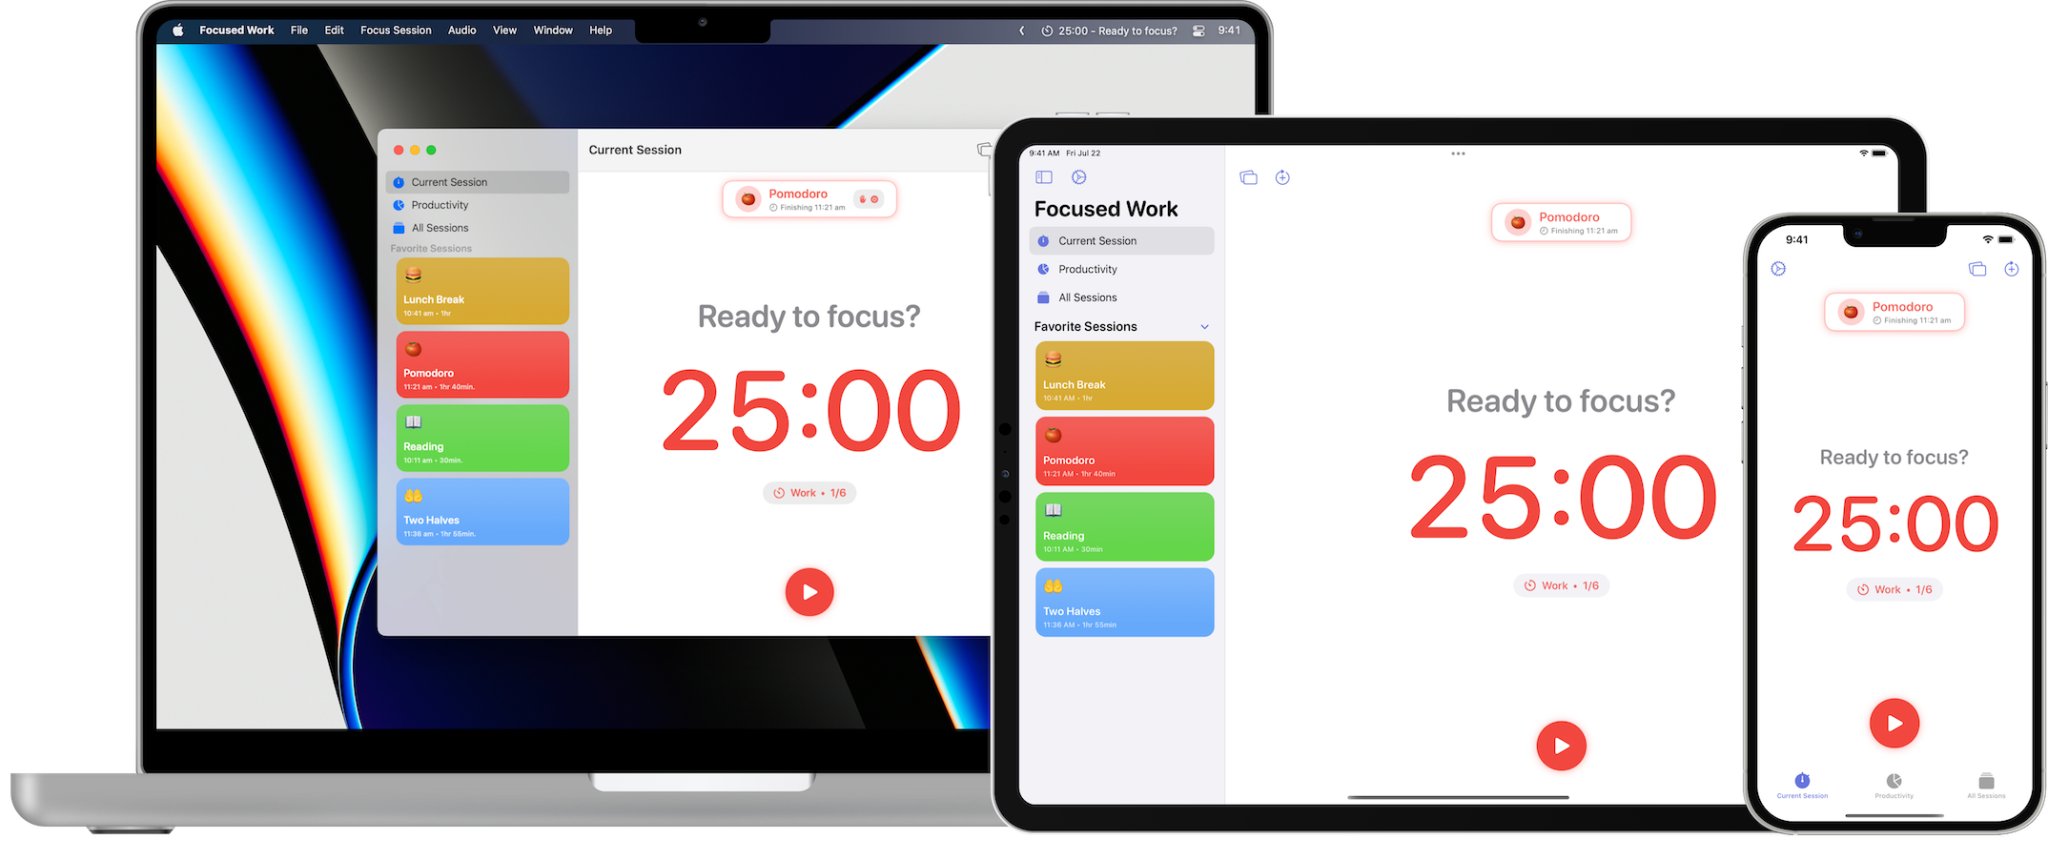 Improve Your Productivity With the Newly Update Focused Work